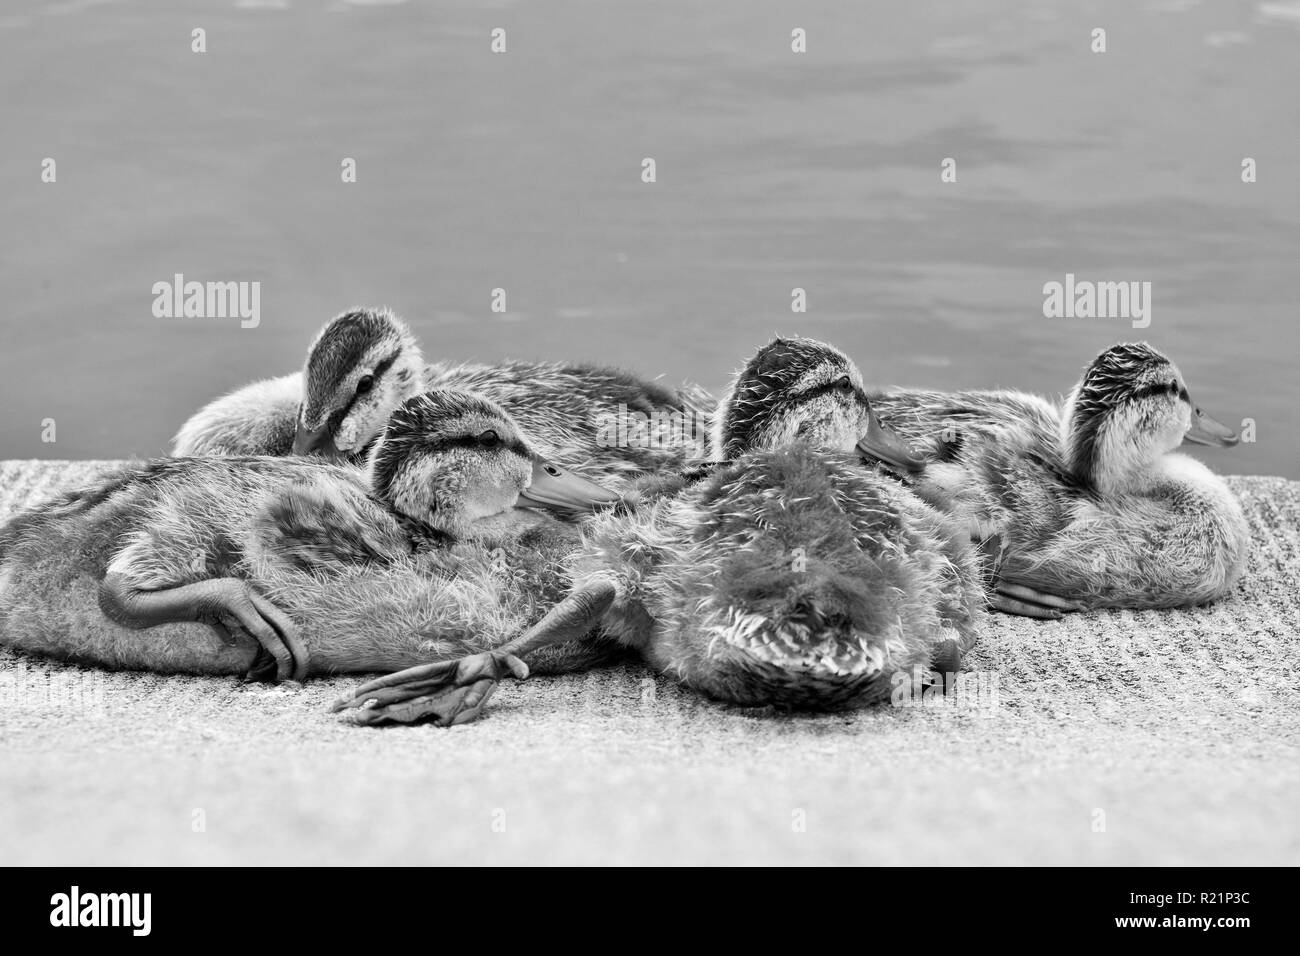 Young ducks lounge next to a lake in black and white Stock Photo